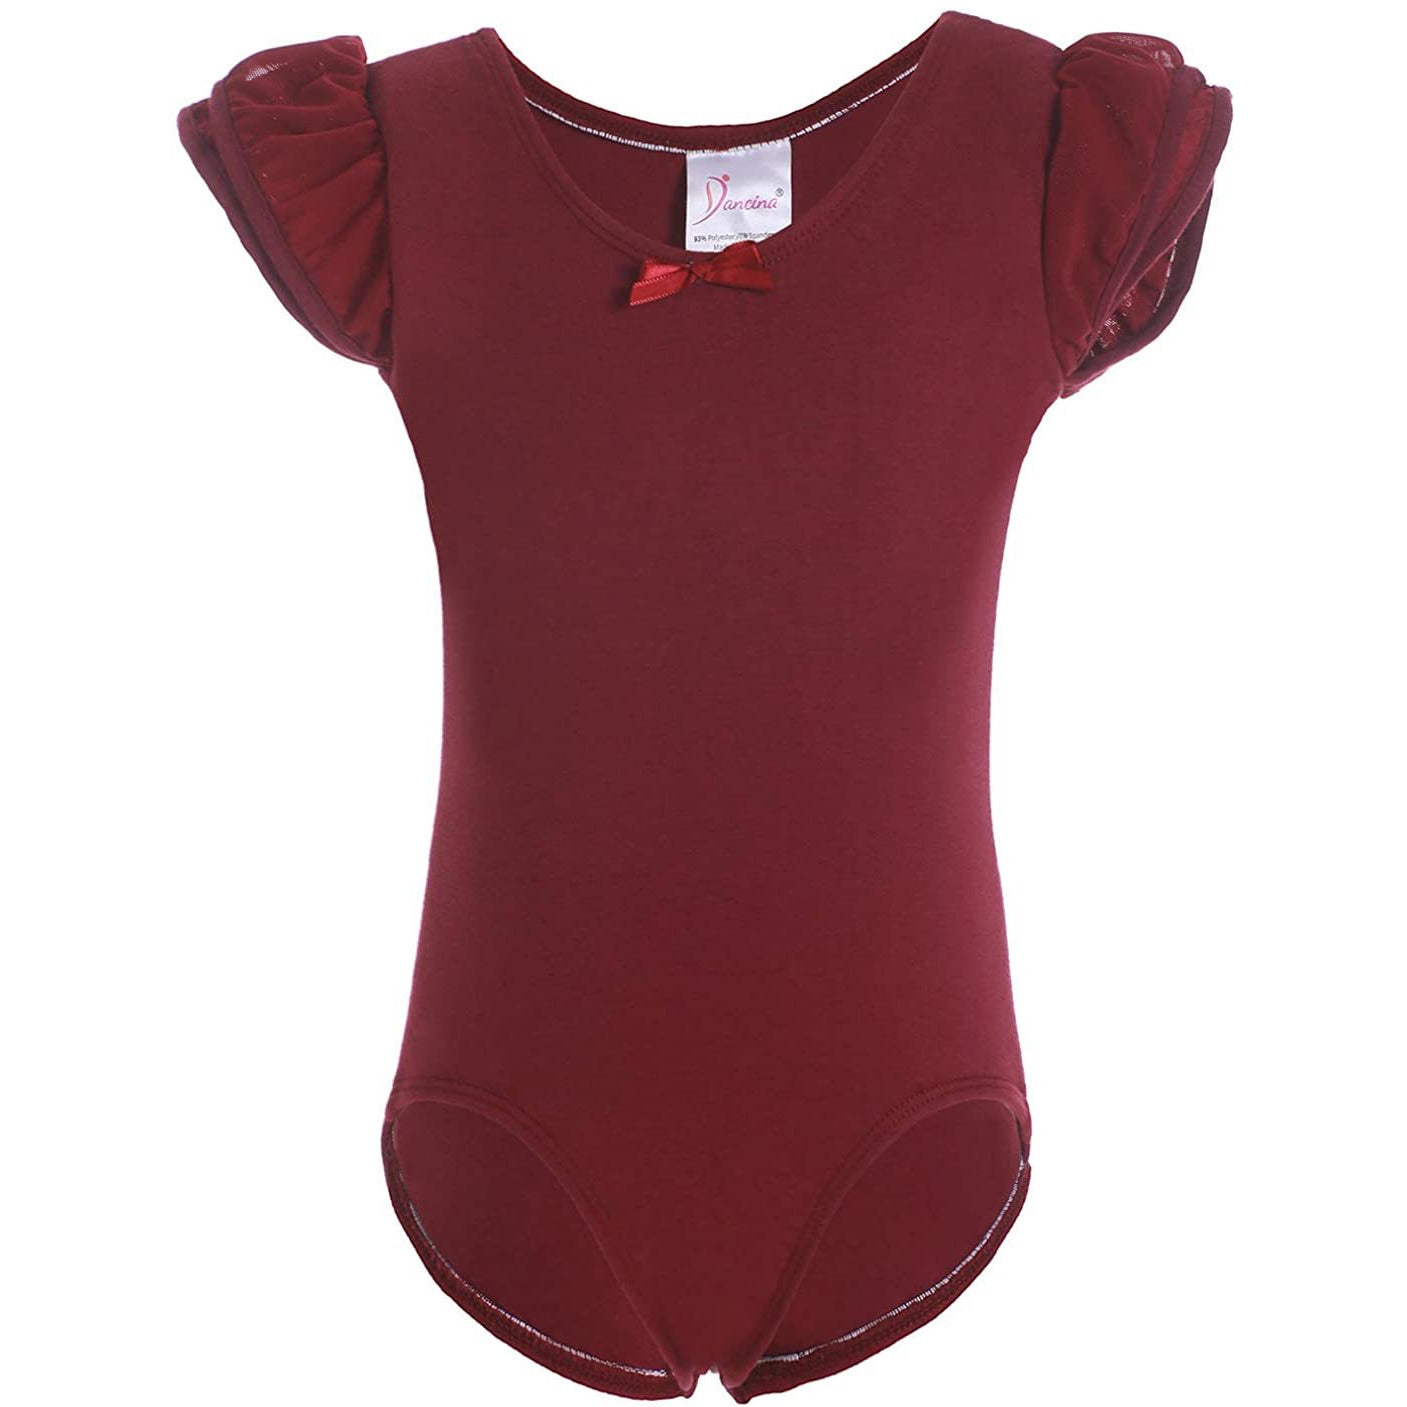 Dancina Girls Ballet Leotard with Flutter Sleeve and Full Front Lining in Wine Red